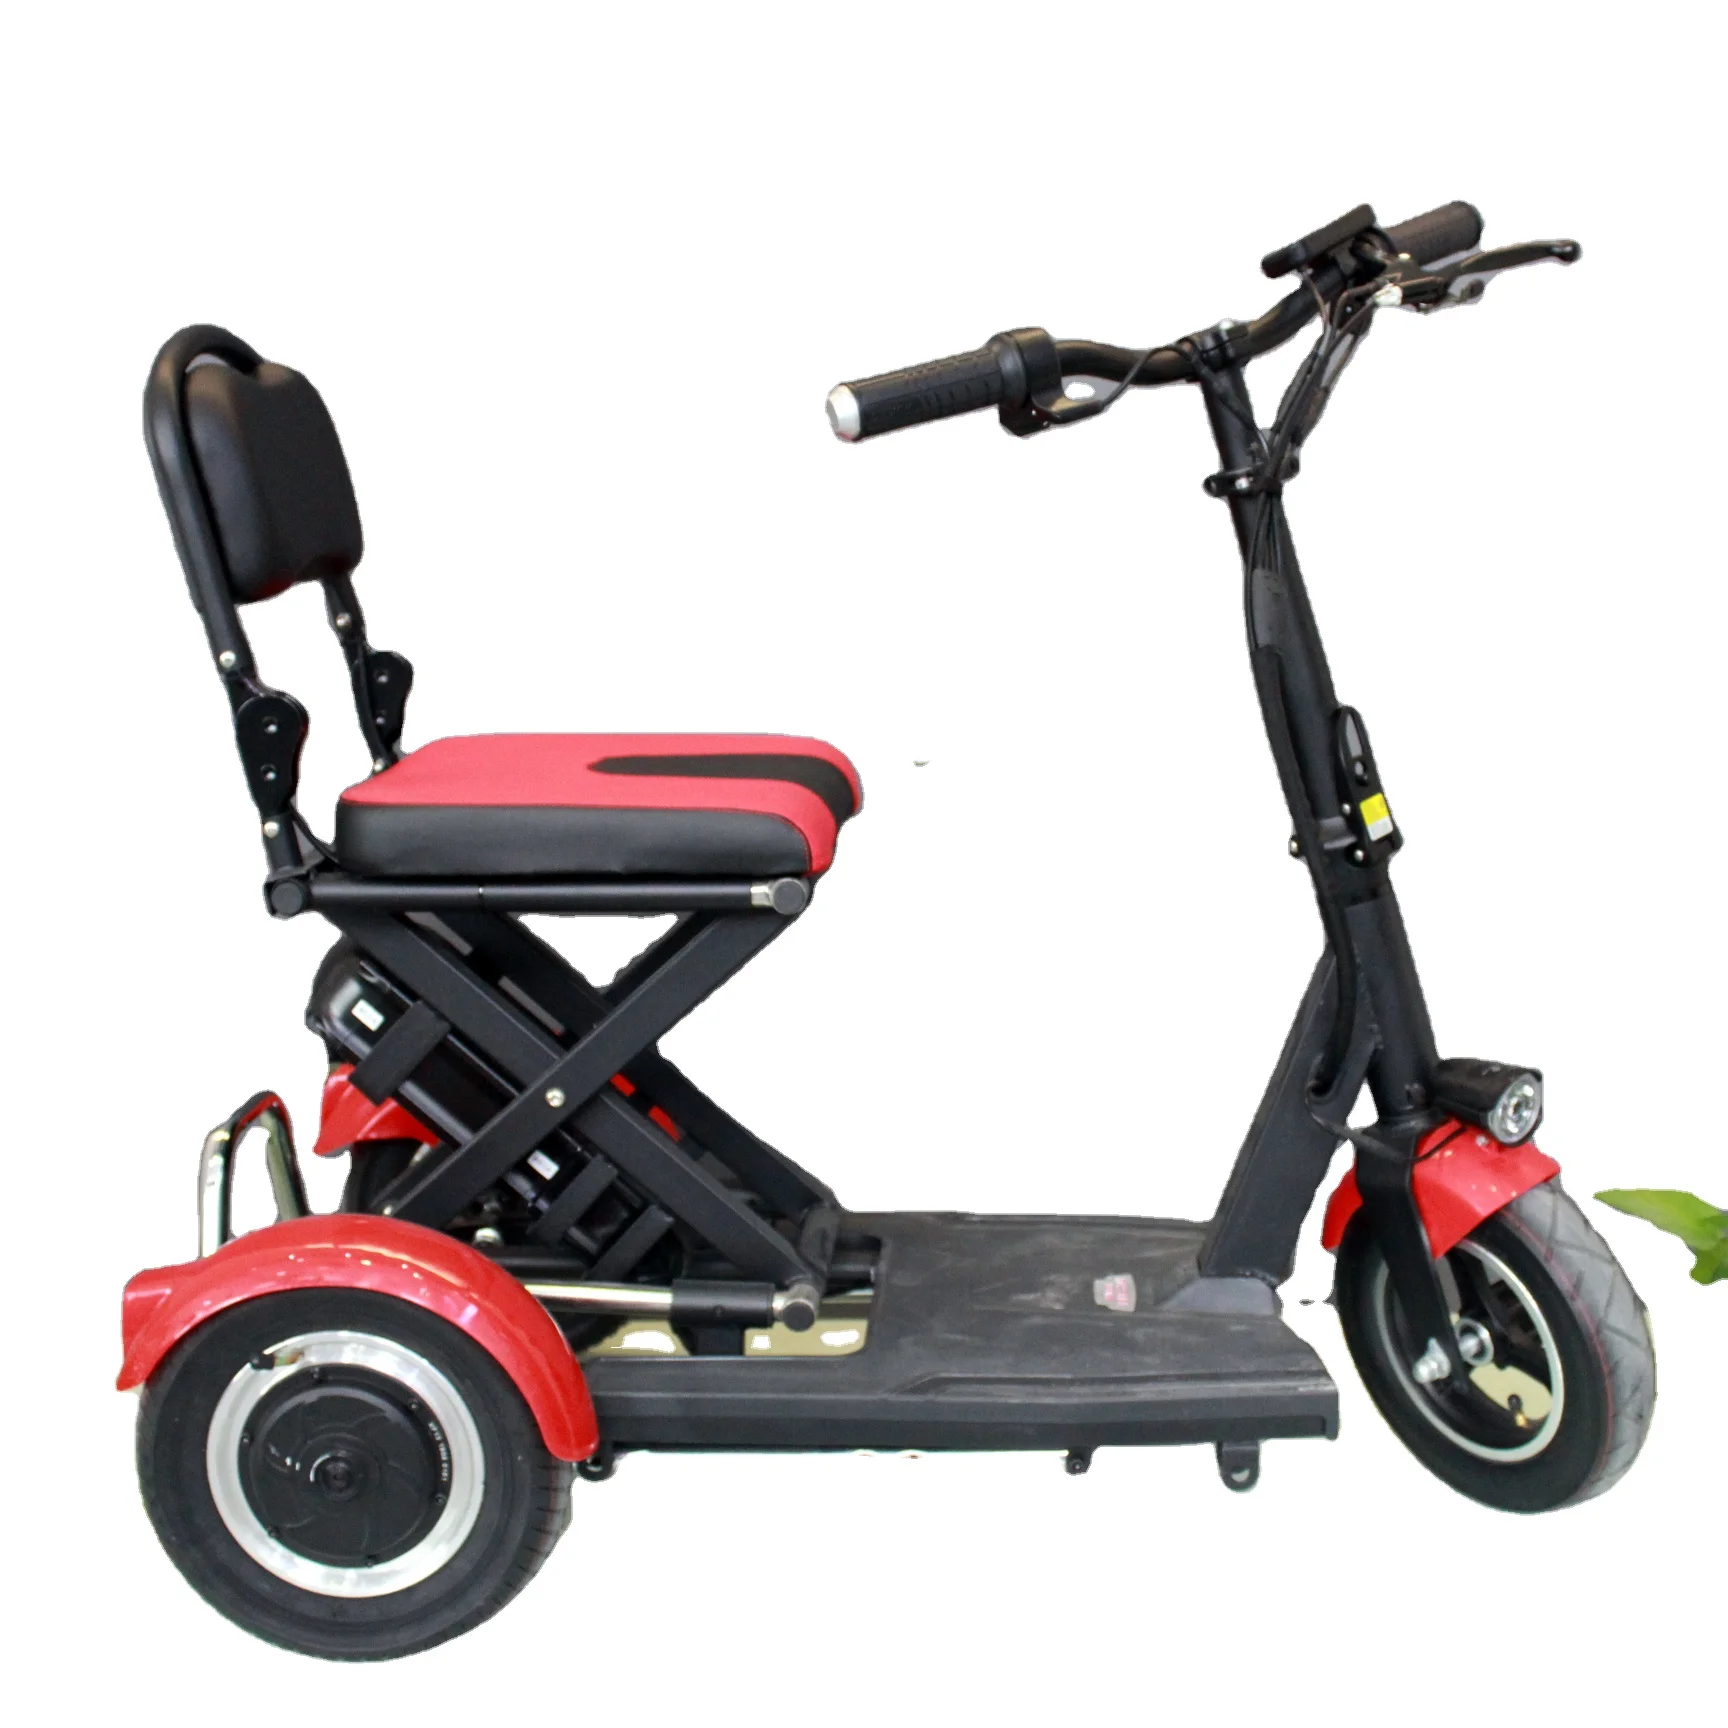 Electric Scooter Folding Type For Elderly And Disabled Handicapped Scooters 36v/48v 10Ah Lithium Battery Motor Scooter custom atomi alpha electric scooter 9 inch tires peak 650w motor 36v 10ah battery for 25 miles range 25km h max speed 120kg max load support app control white